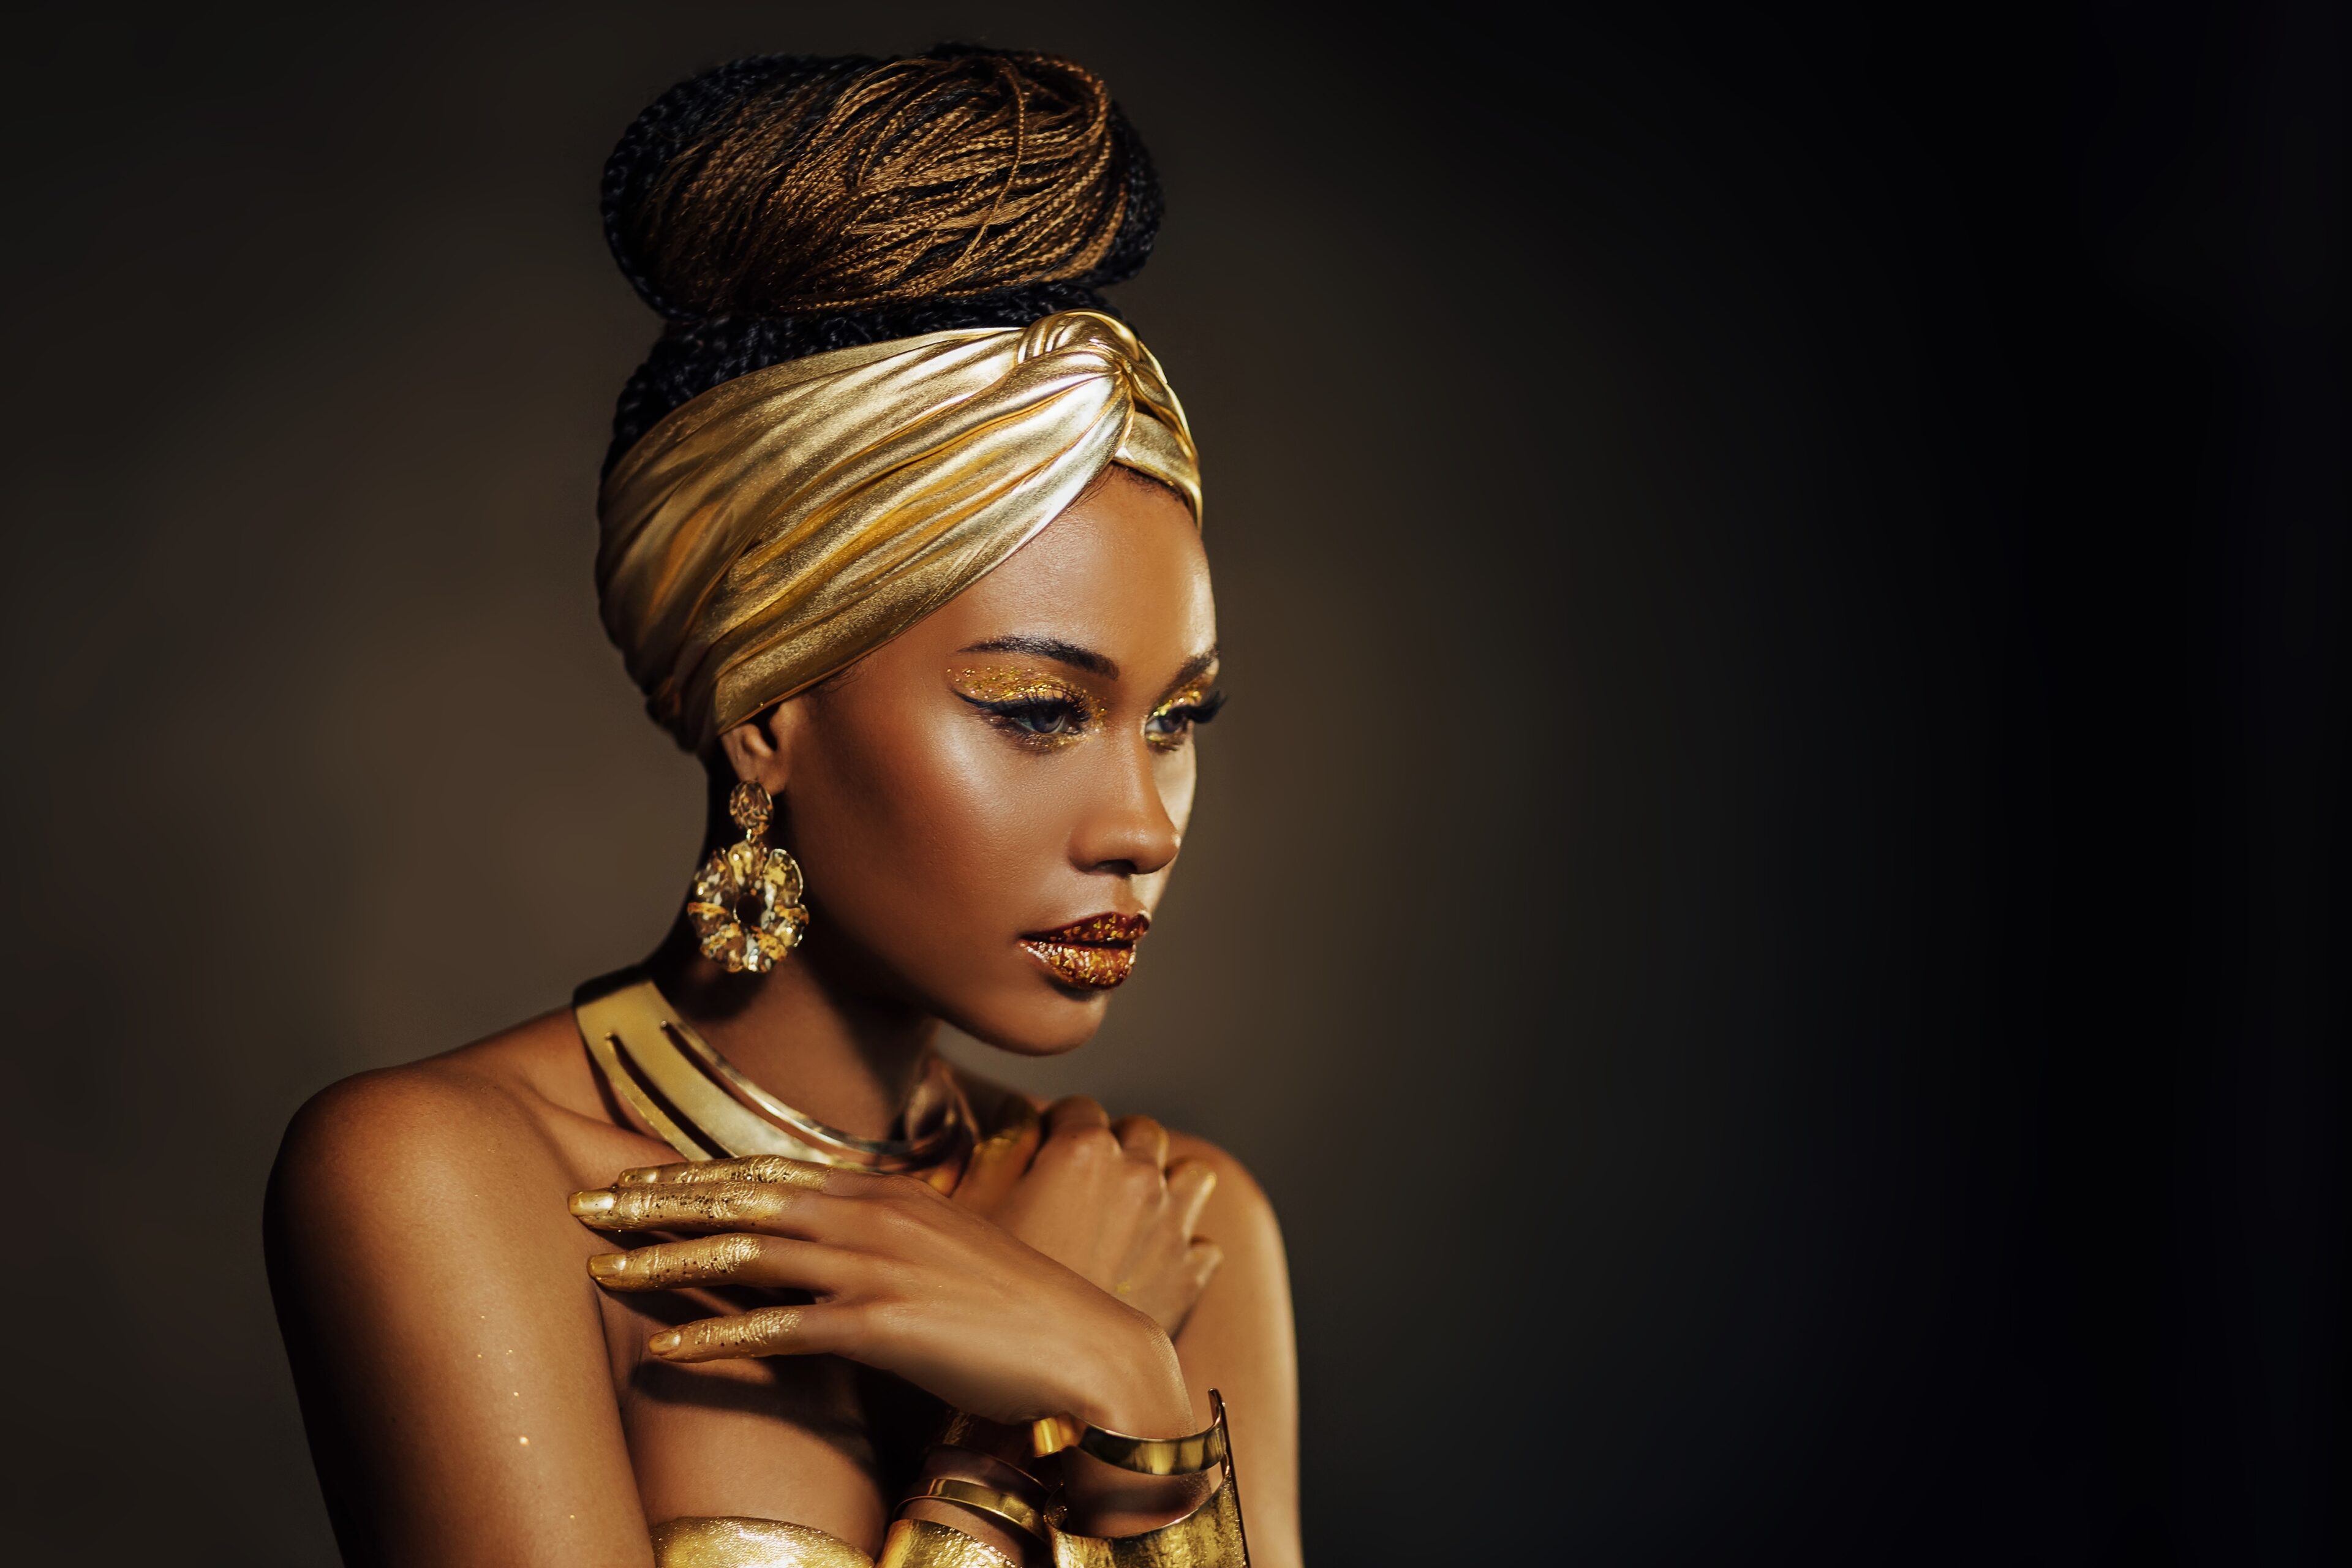 Beautiful African woman with braids